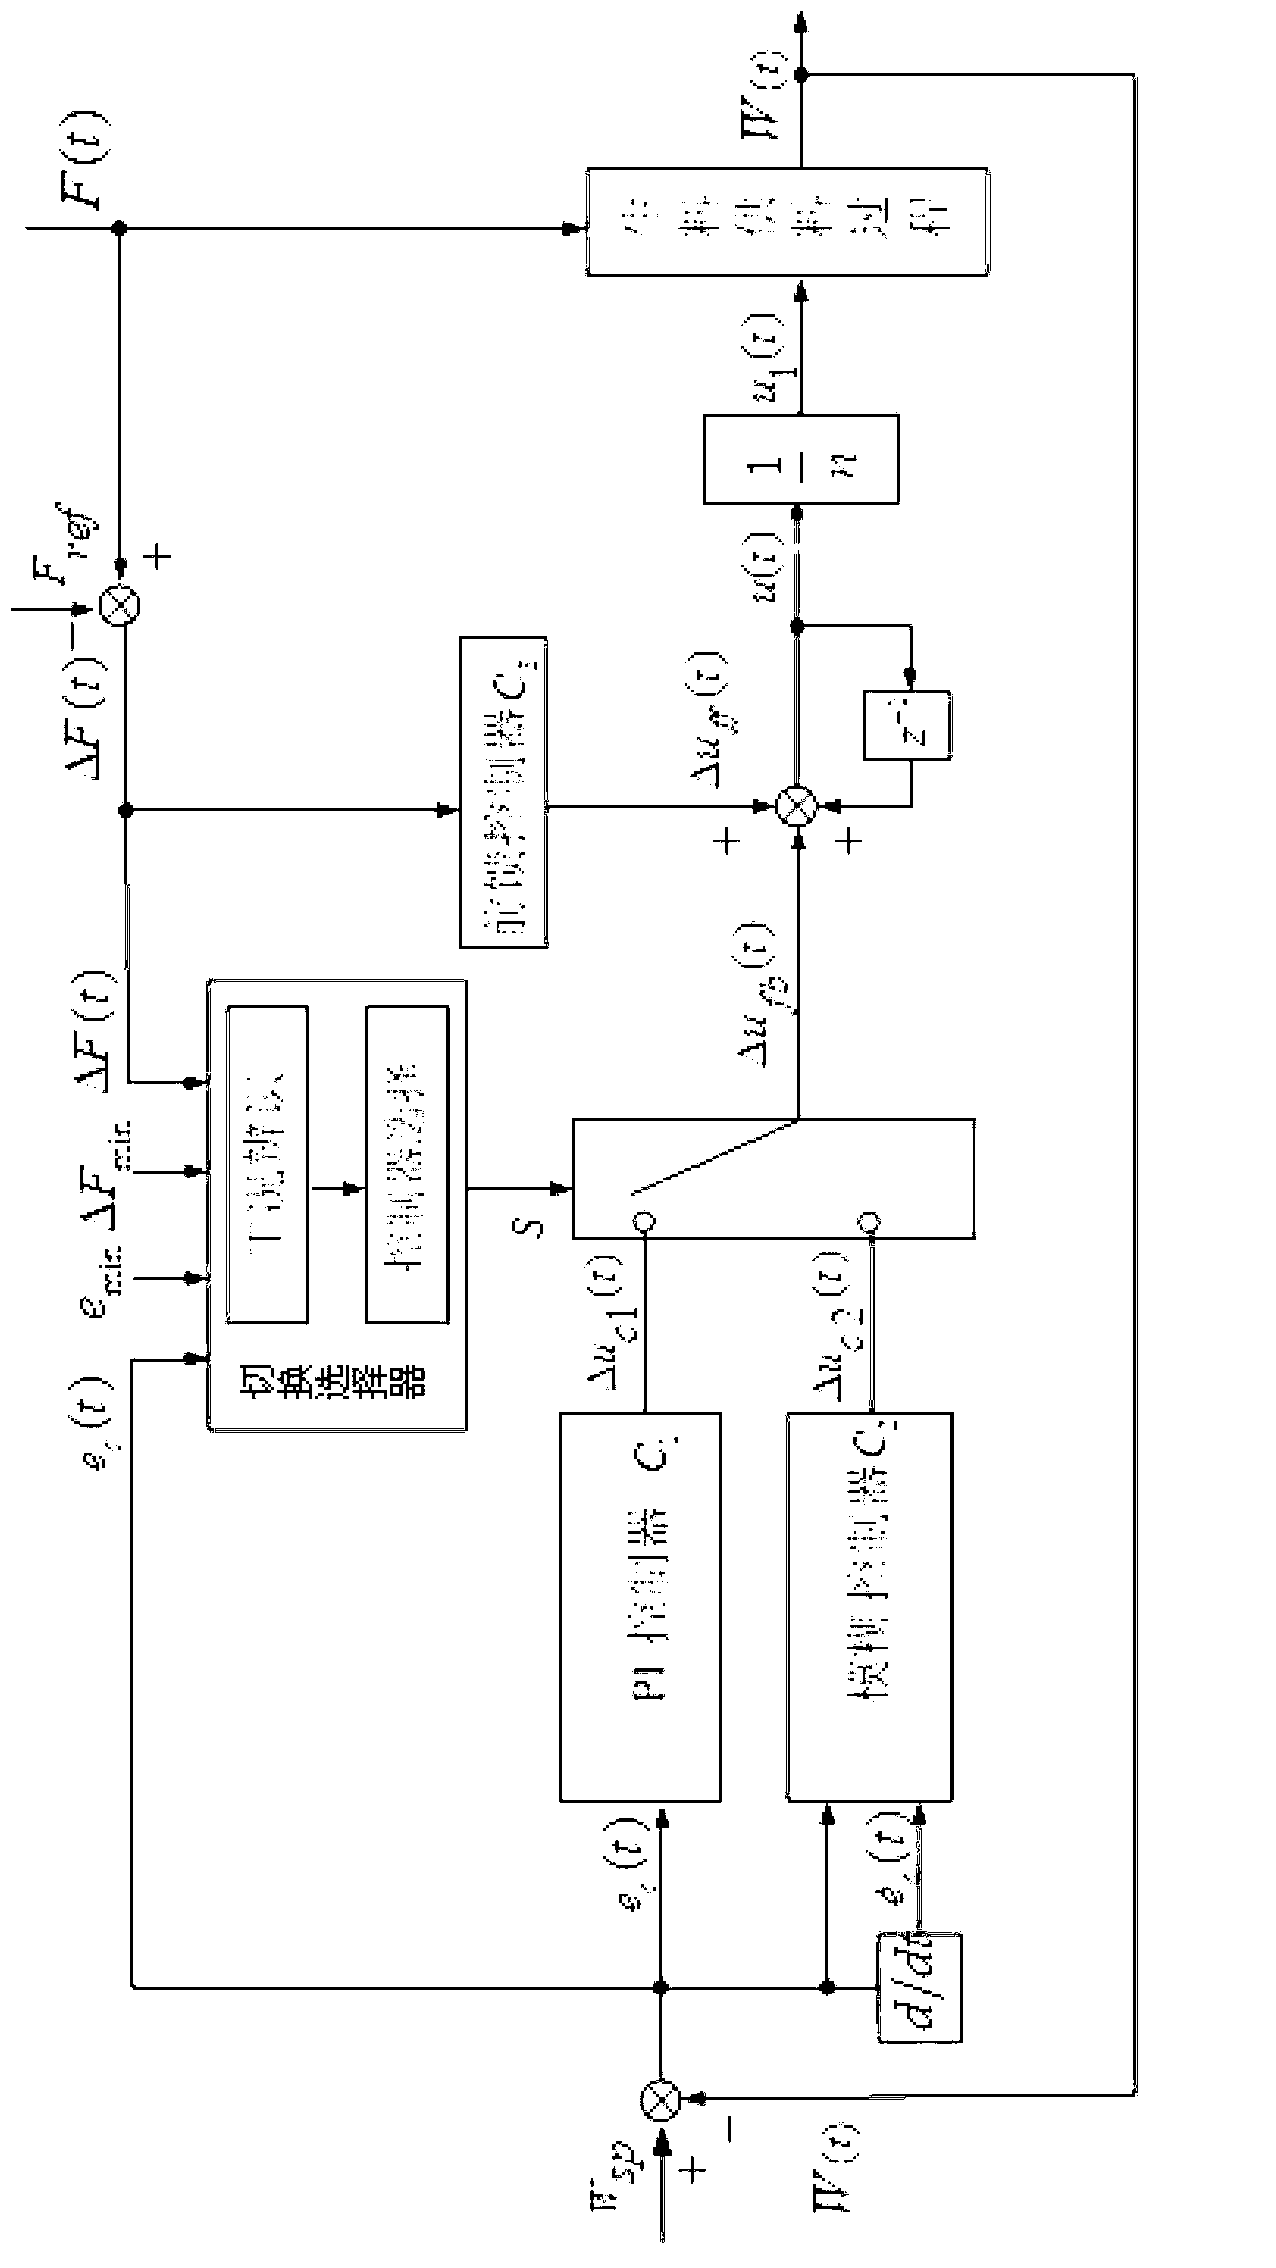 Intelligent switching control method based on bin weights and implemented in raw material feeding procedures and control system for intelligent switching control method